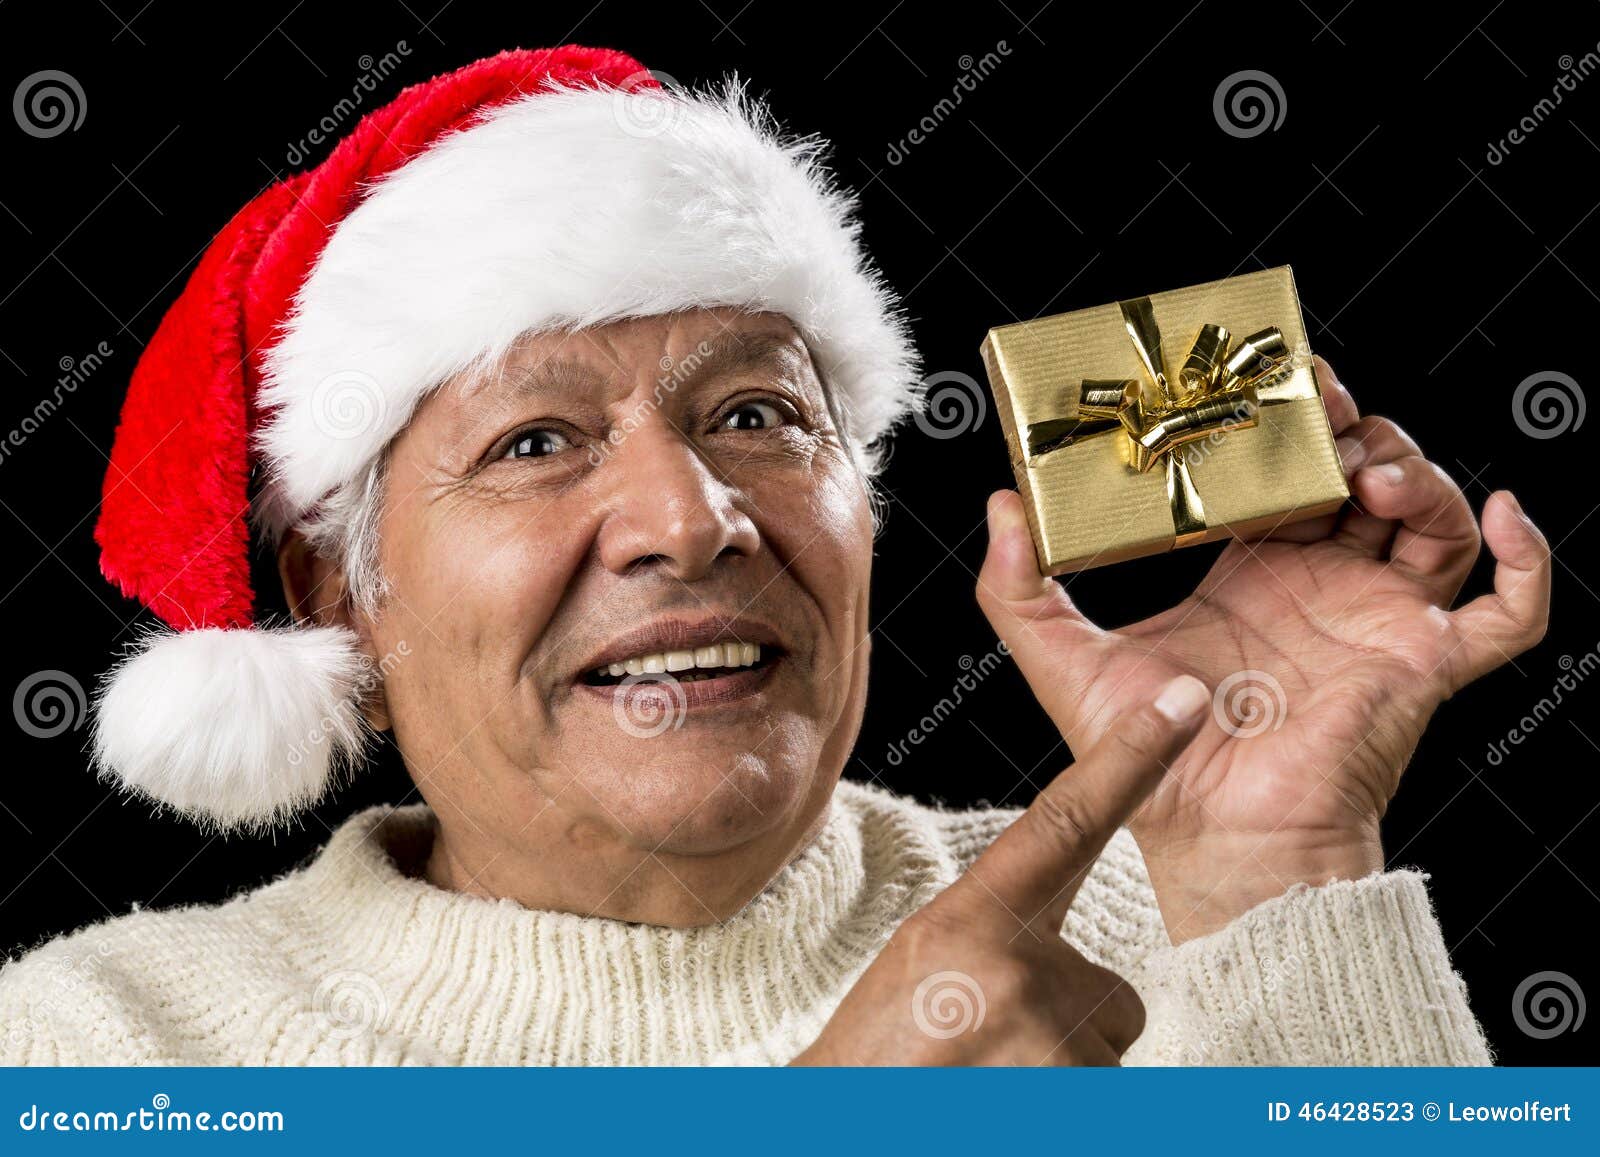 aged man with emphatic look and golden gift